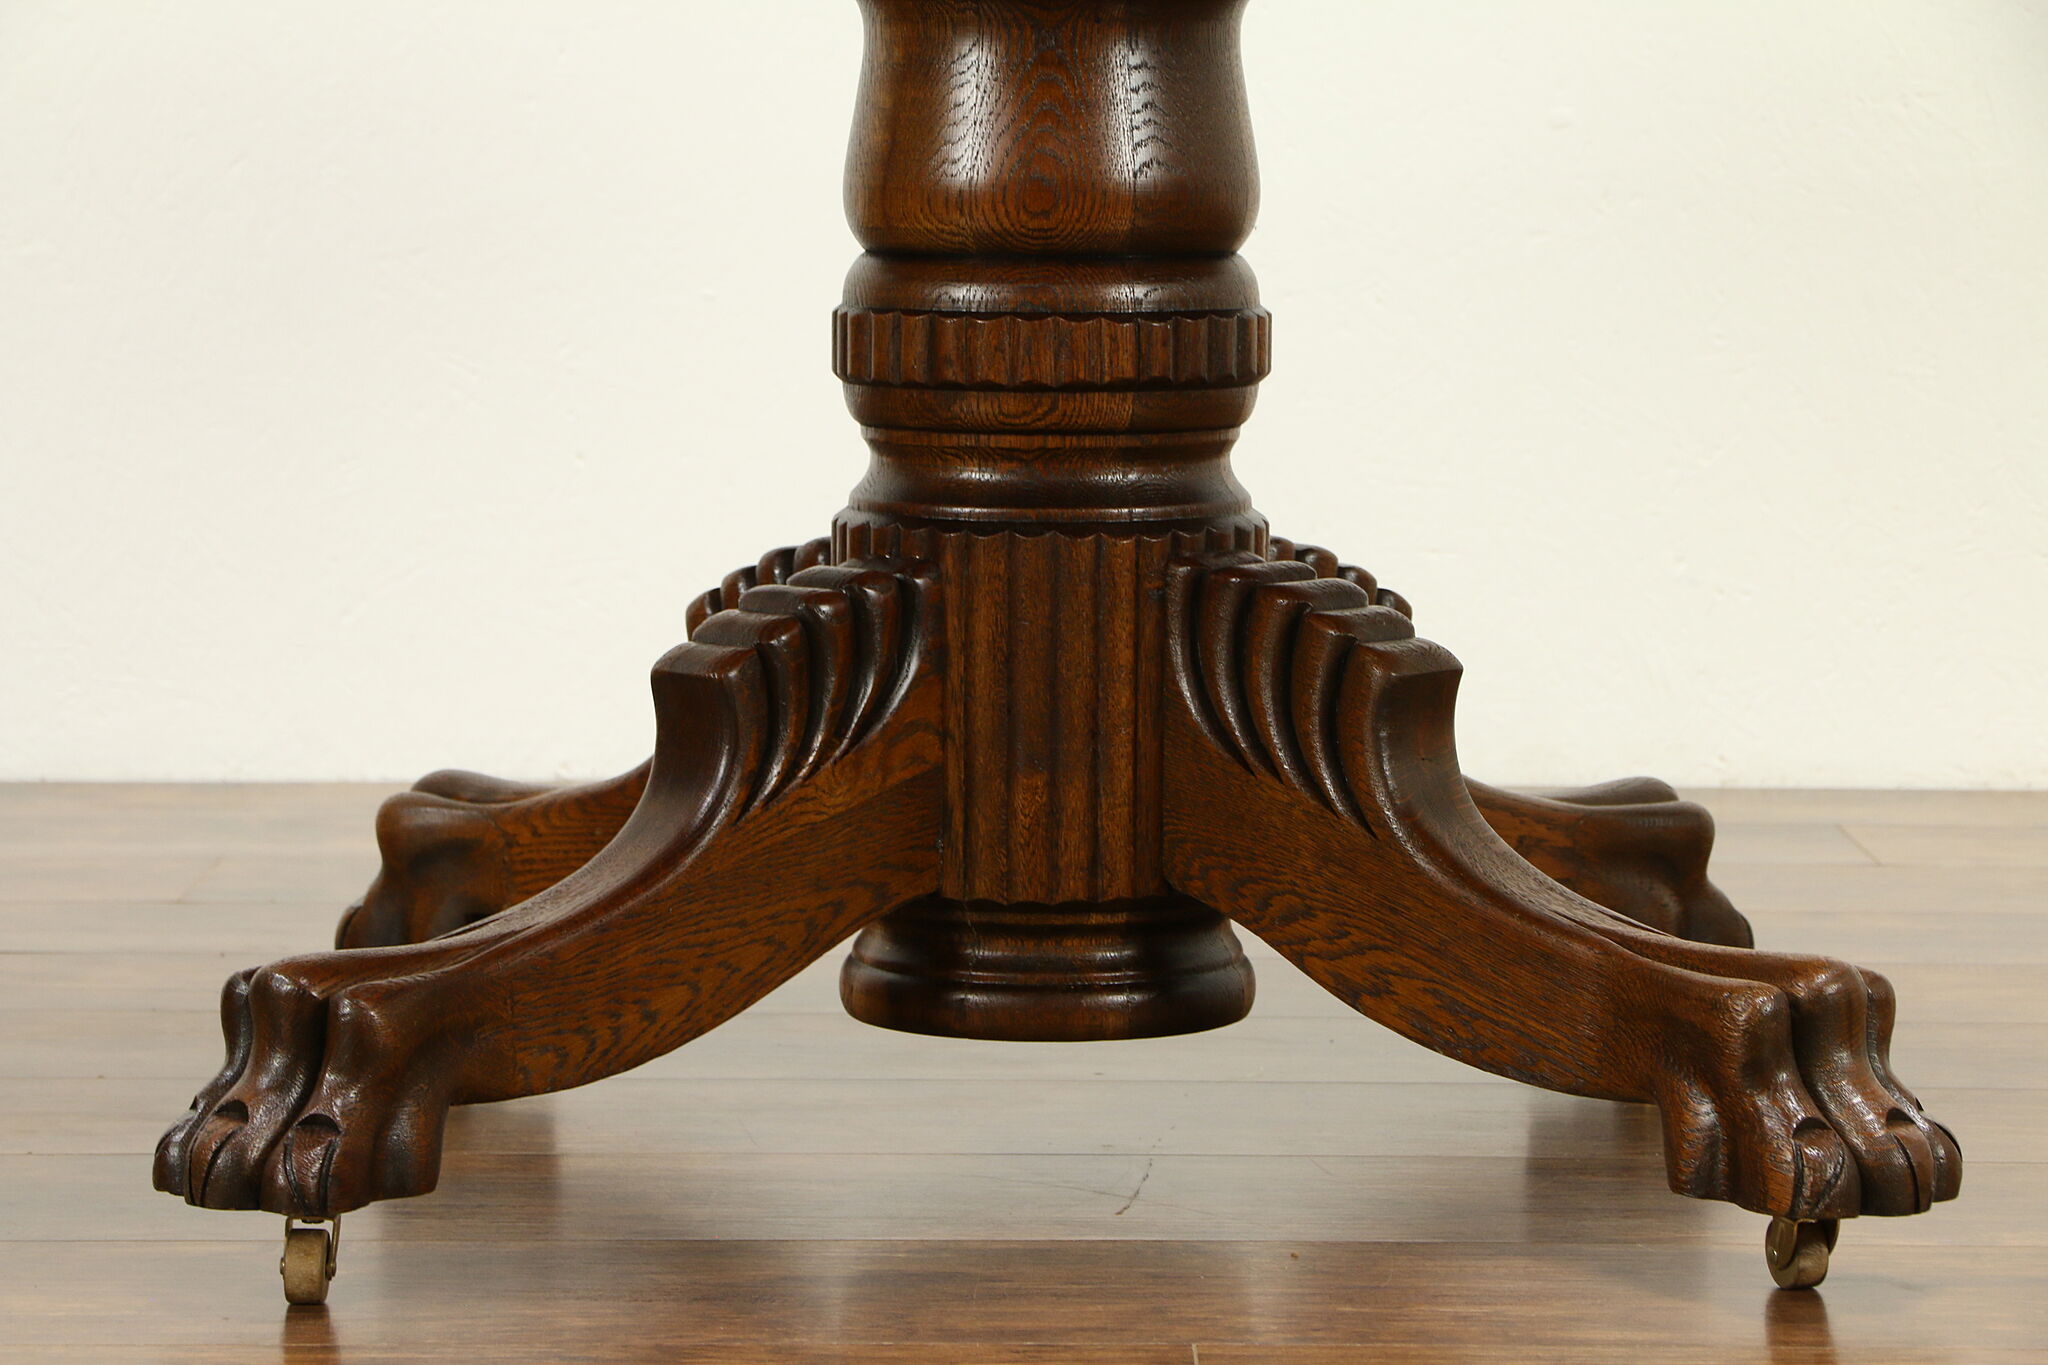 Antique Dining Room Table Lion's Paw Feet